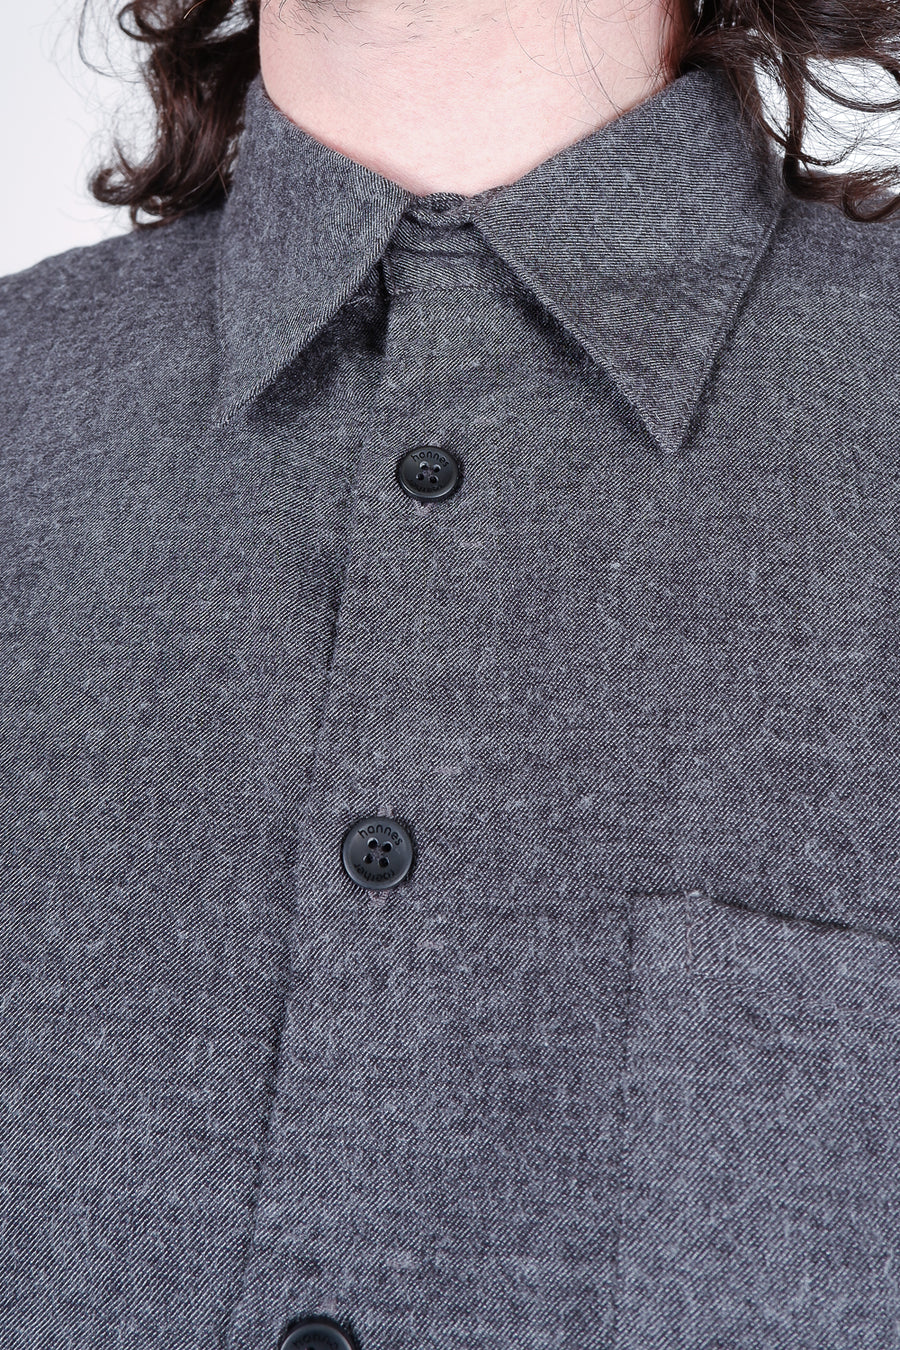 Buy the Hannes Roether Cotton/Wool Shirt in Grey at Intro. Spend £50 for free UK delivery. Official stockists. We ship worldwide.